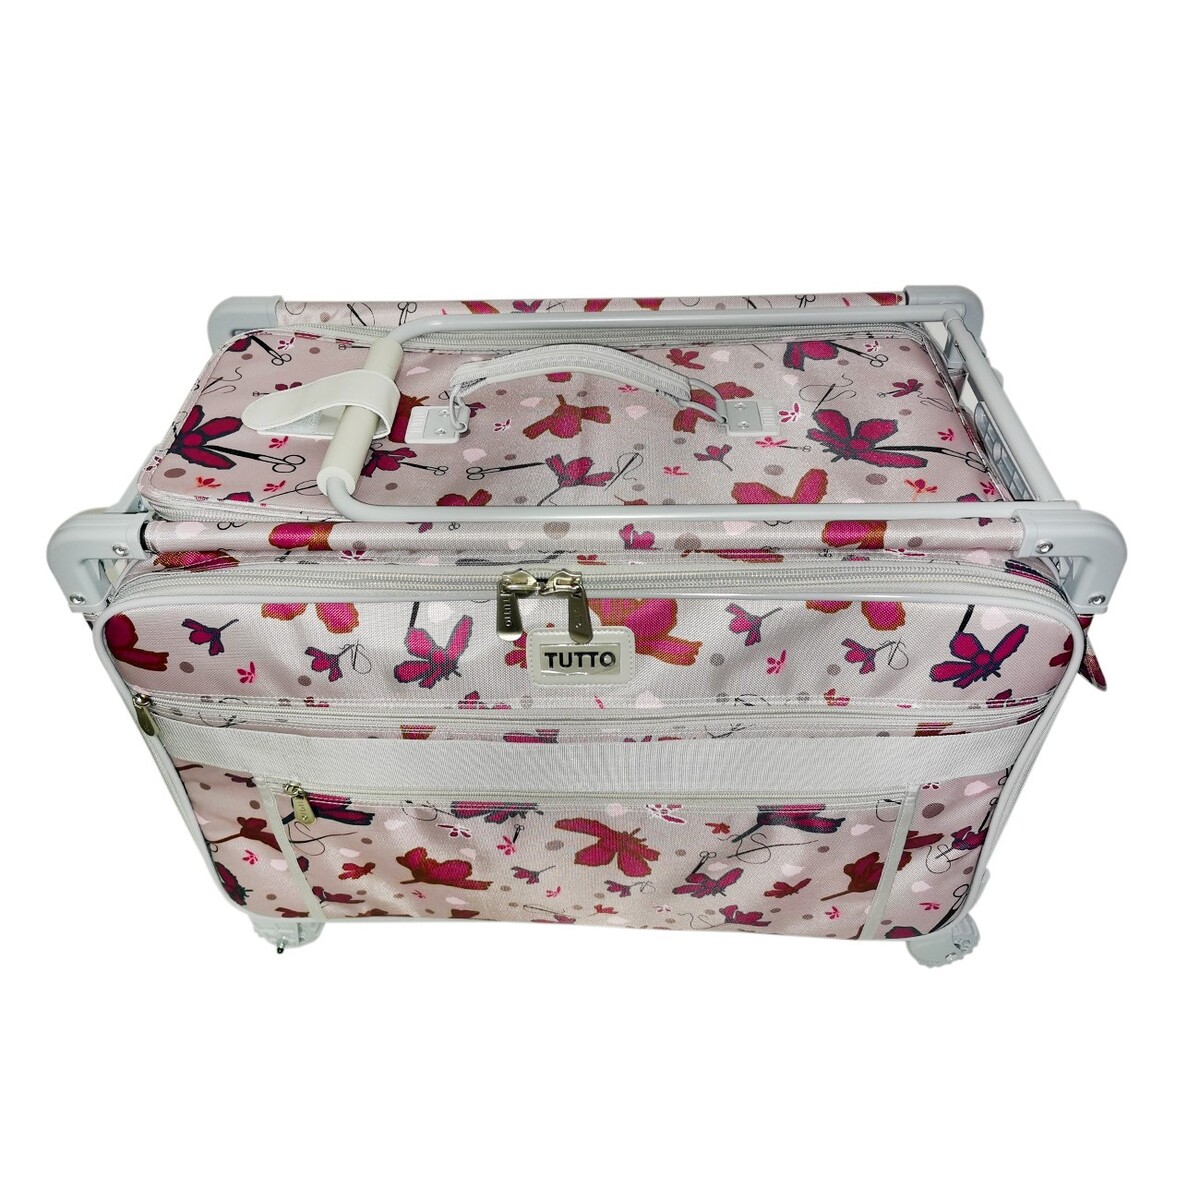 Tutto Large Sewing Machine Bag On Wheels - Red With Daisies